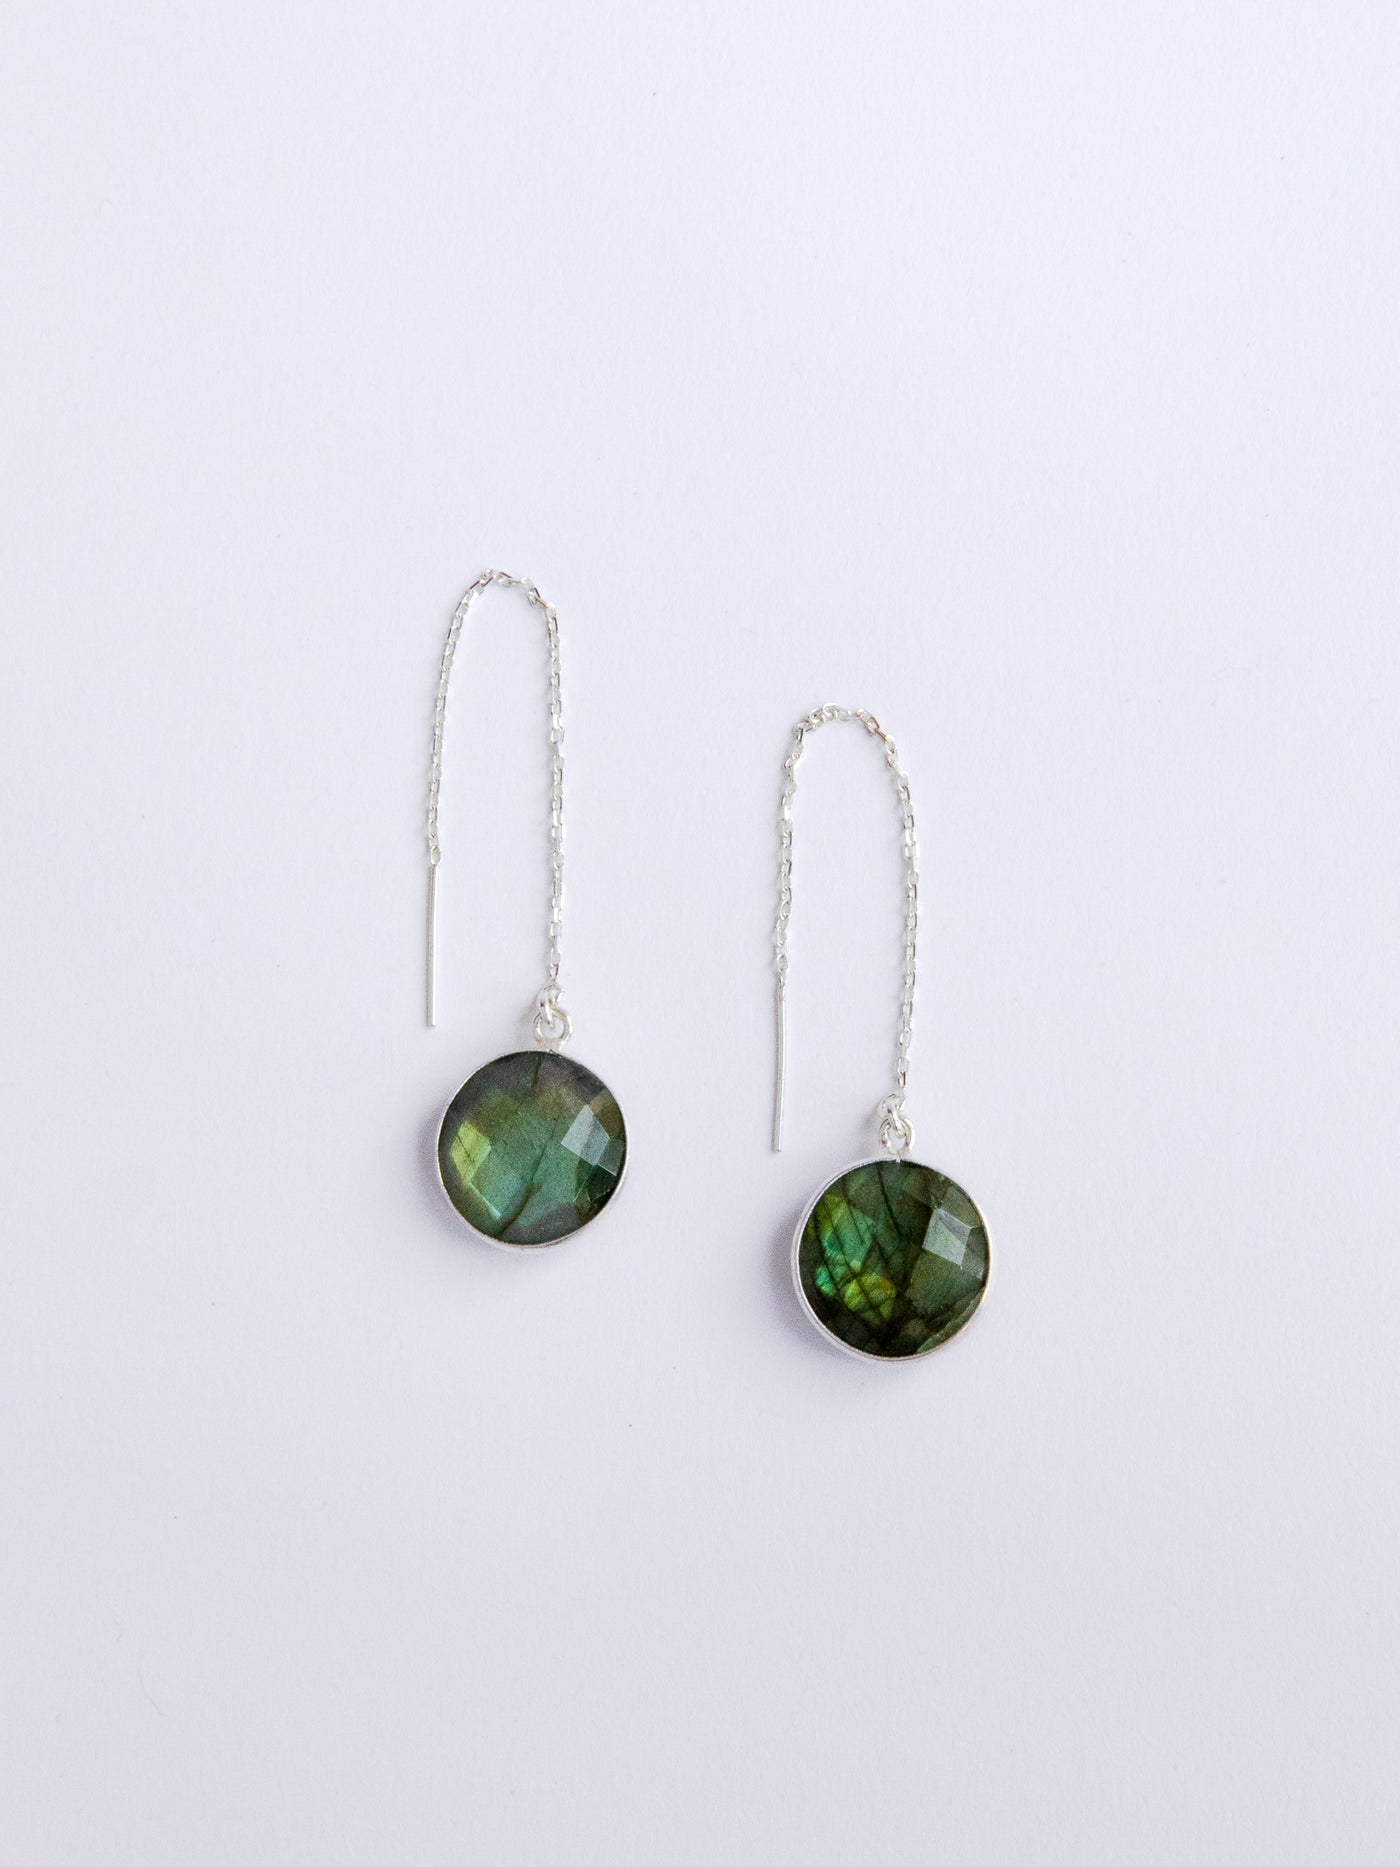 Labradorite Gold Equilibrium Earrings. These circular labradorite threader earrings are set in high quality sterling silver